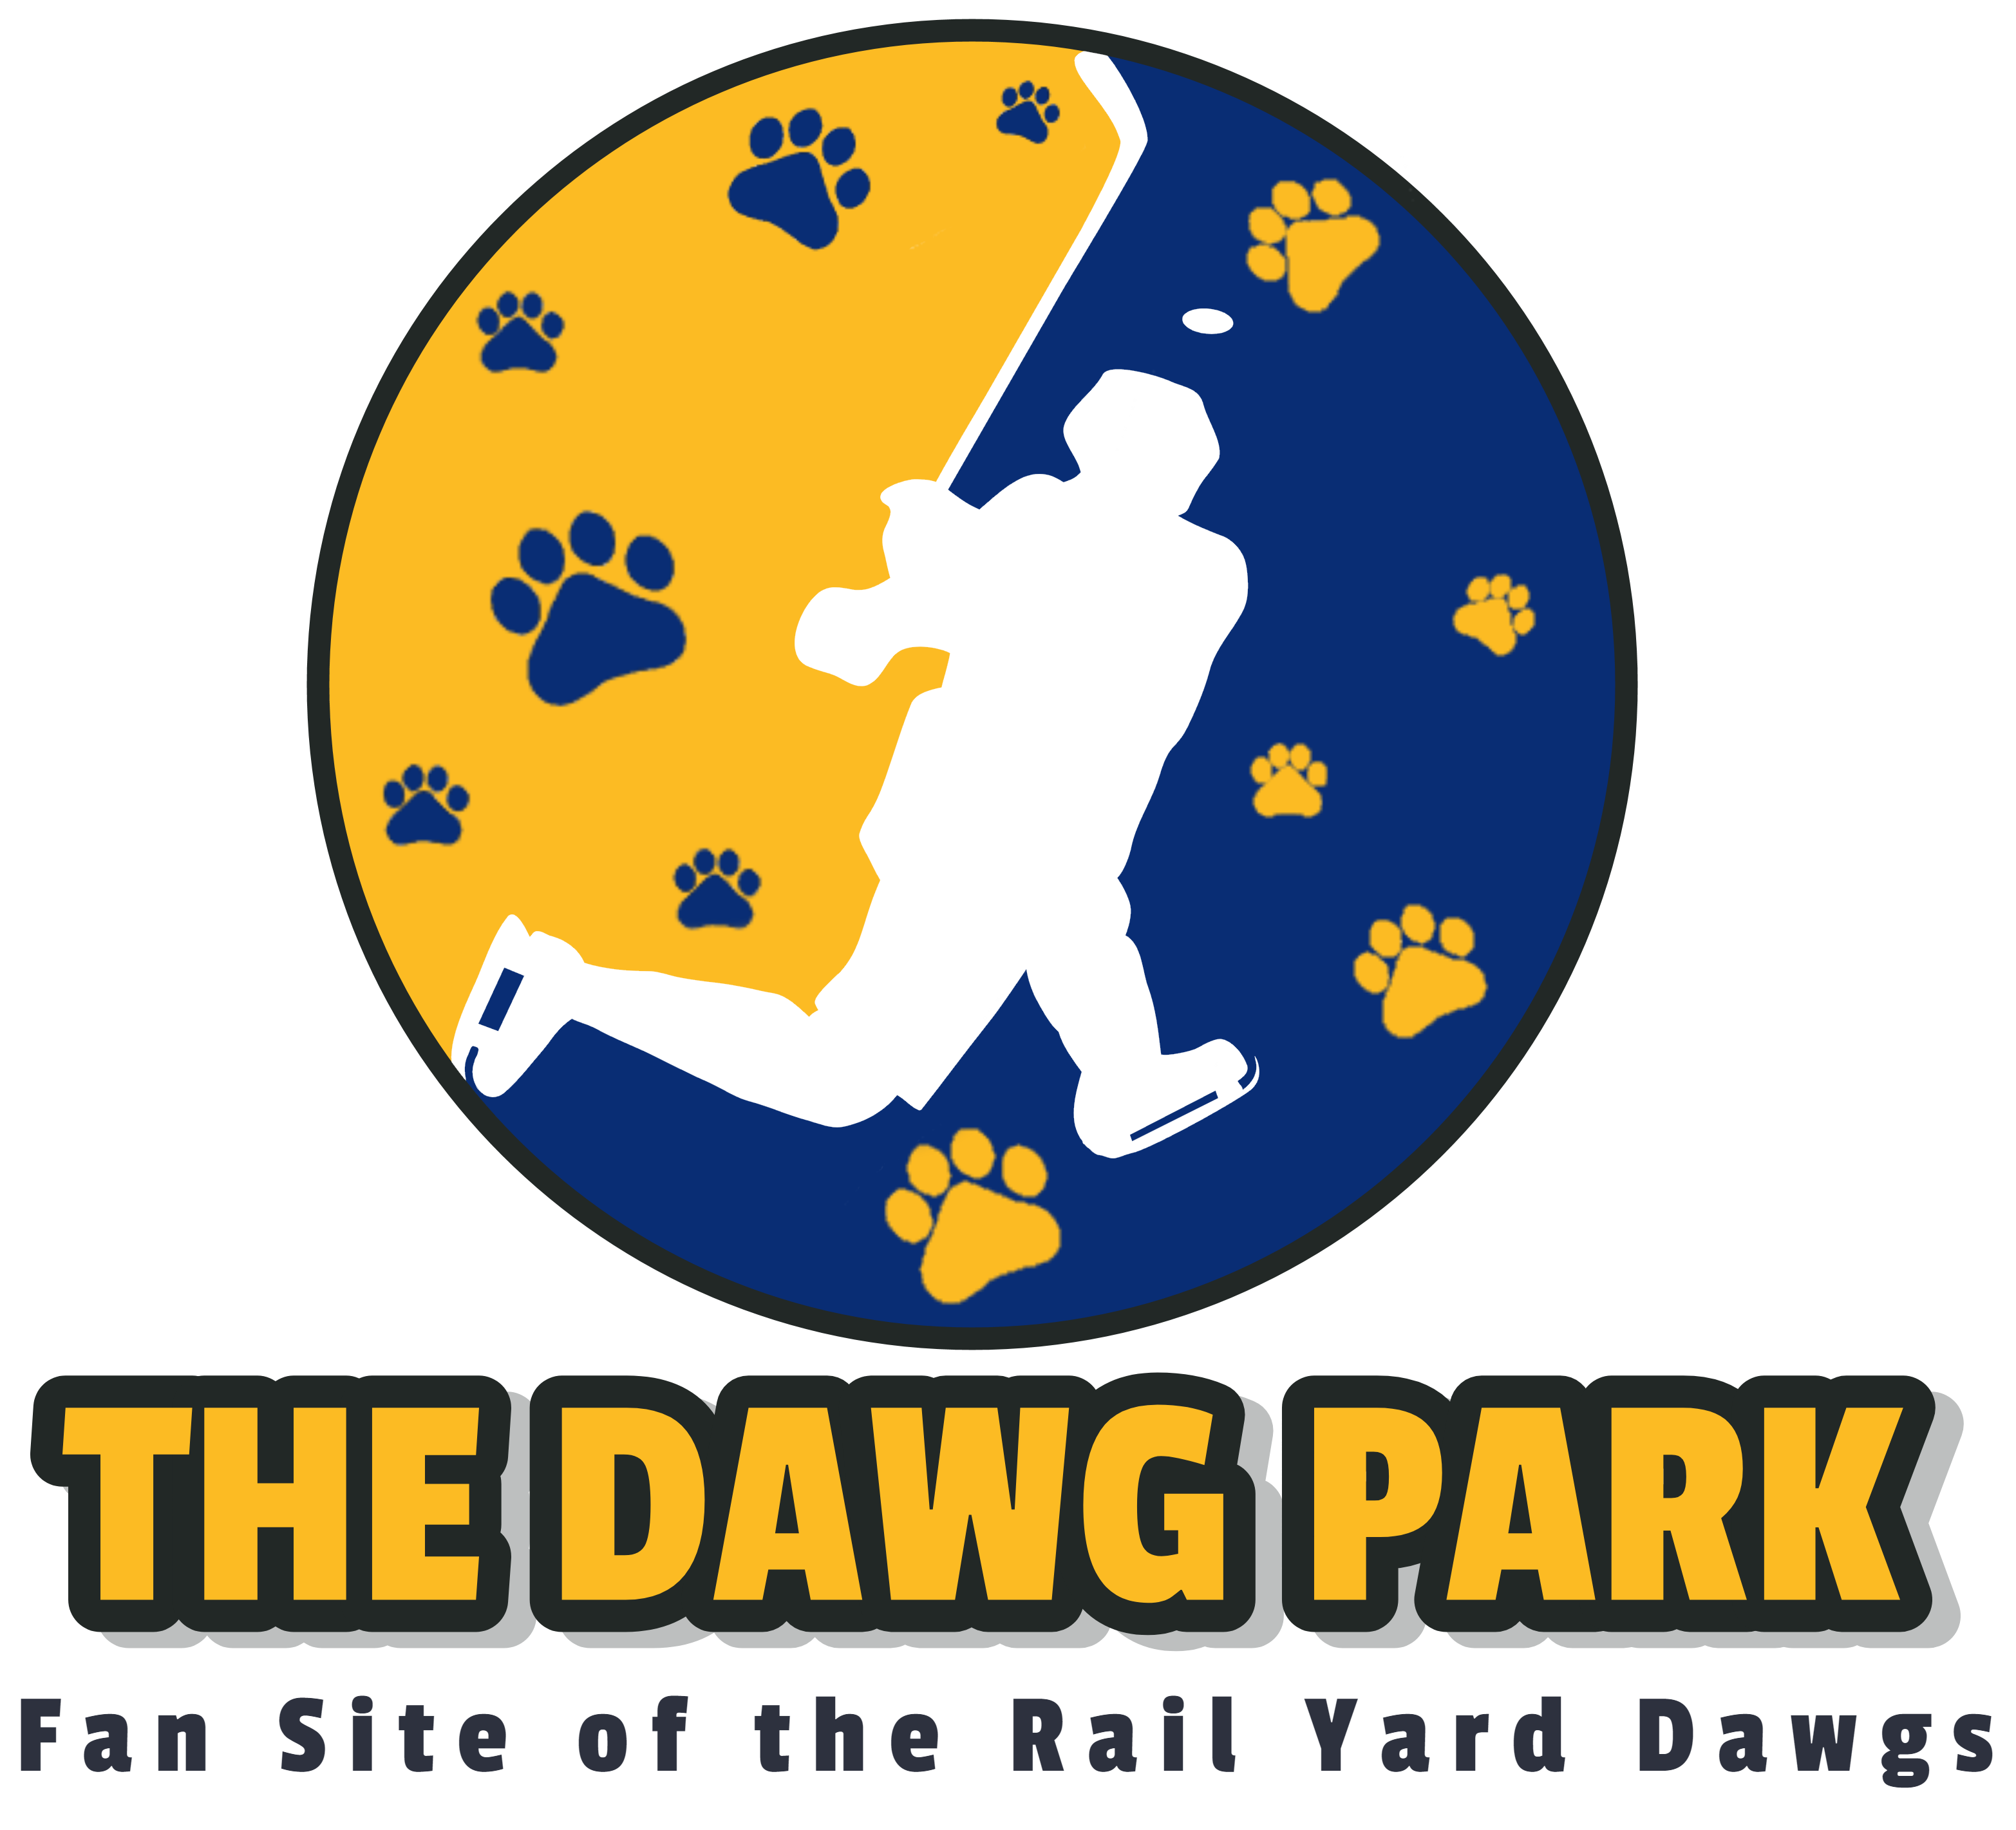 THE DAWG PARK